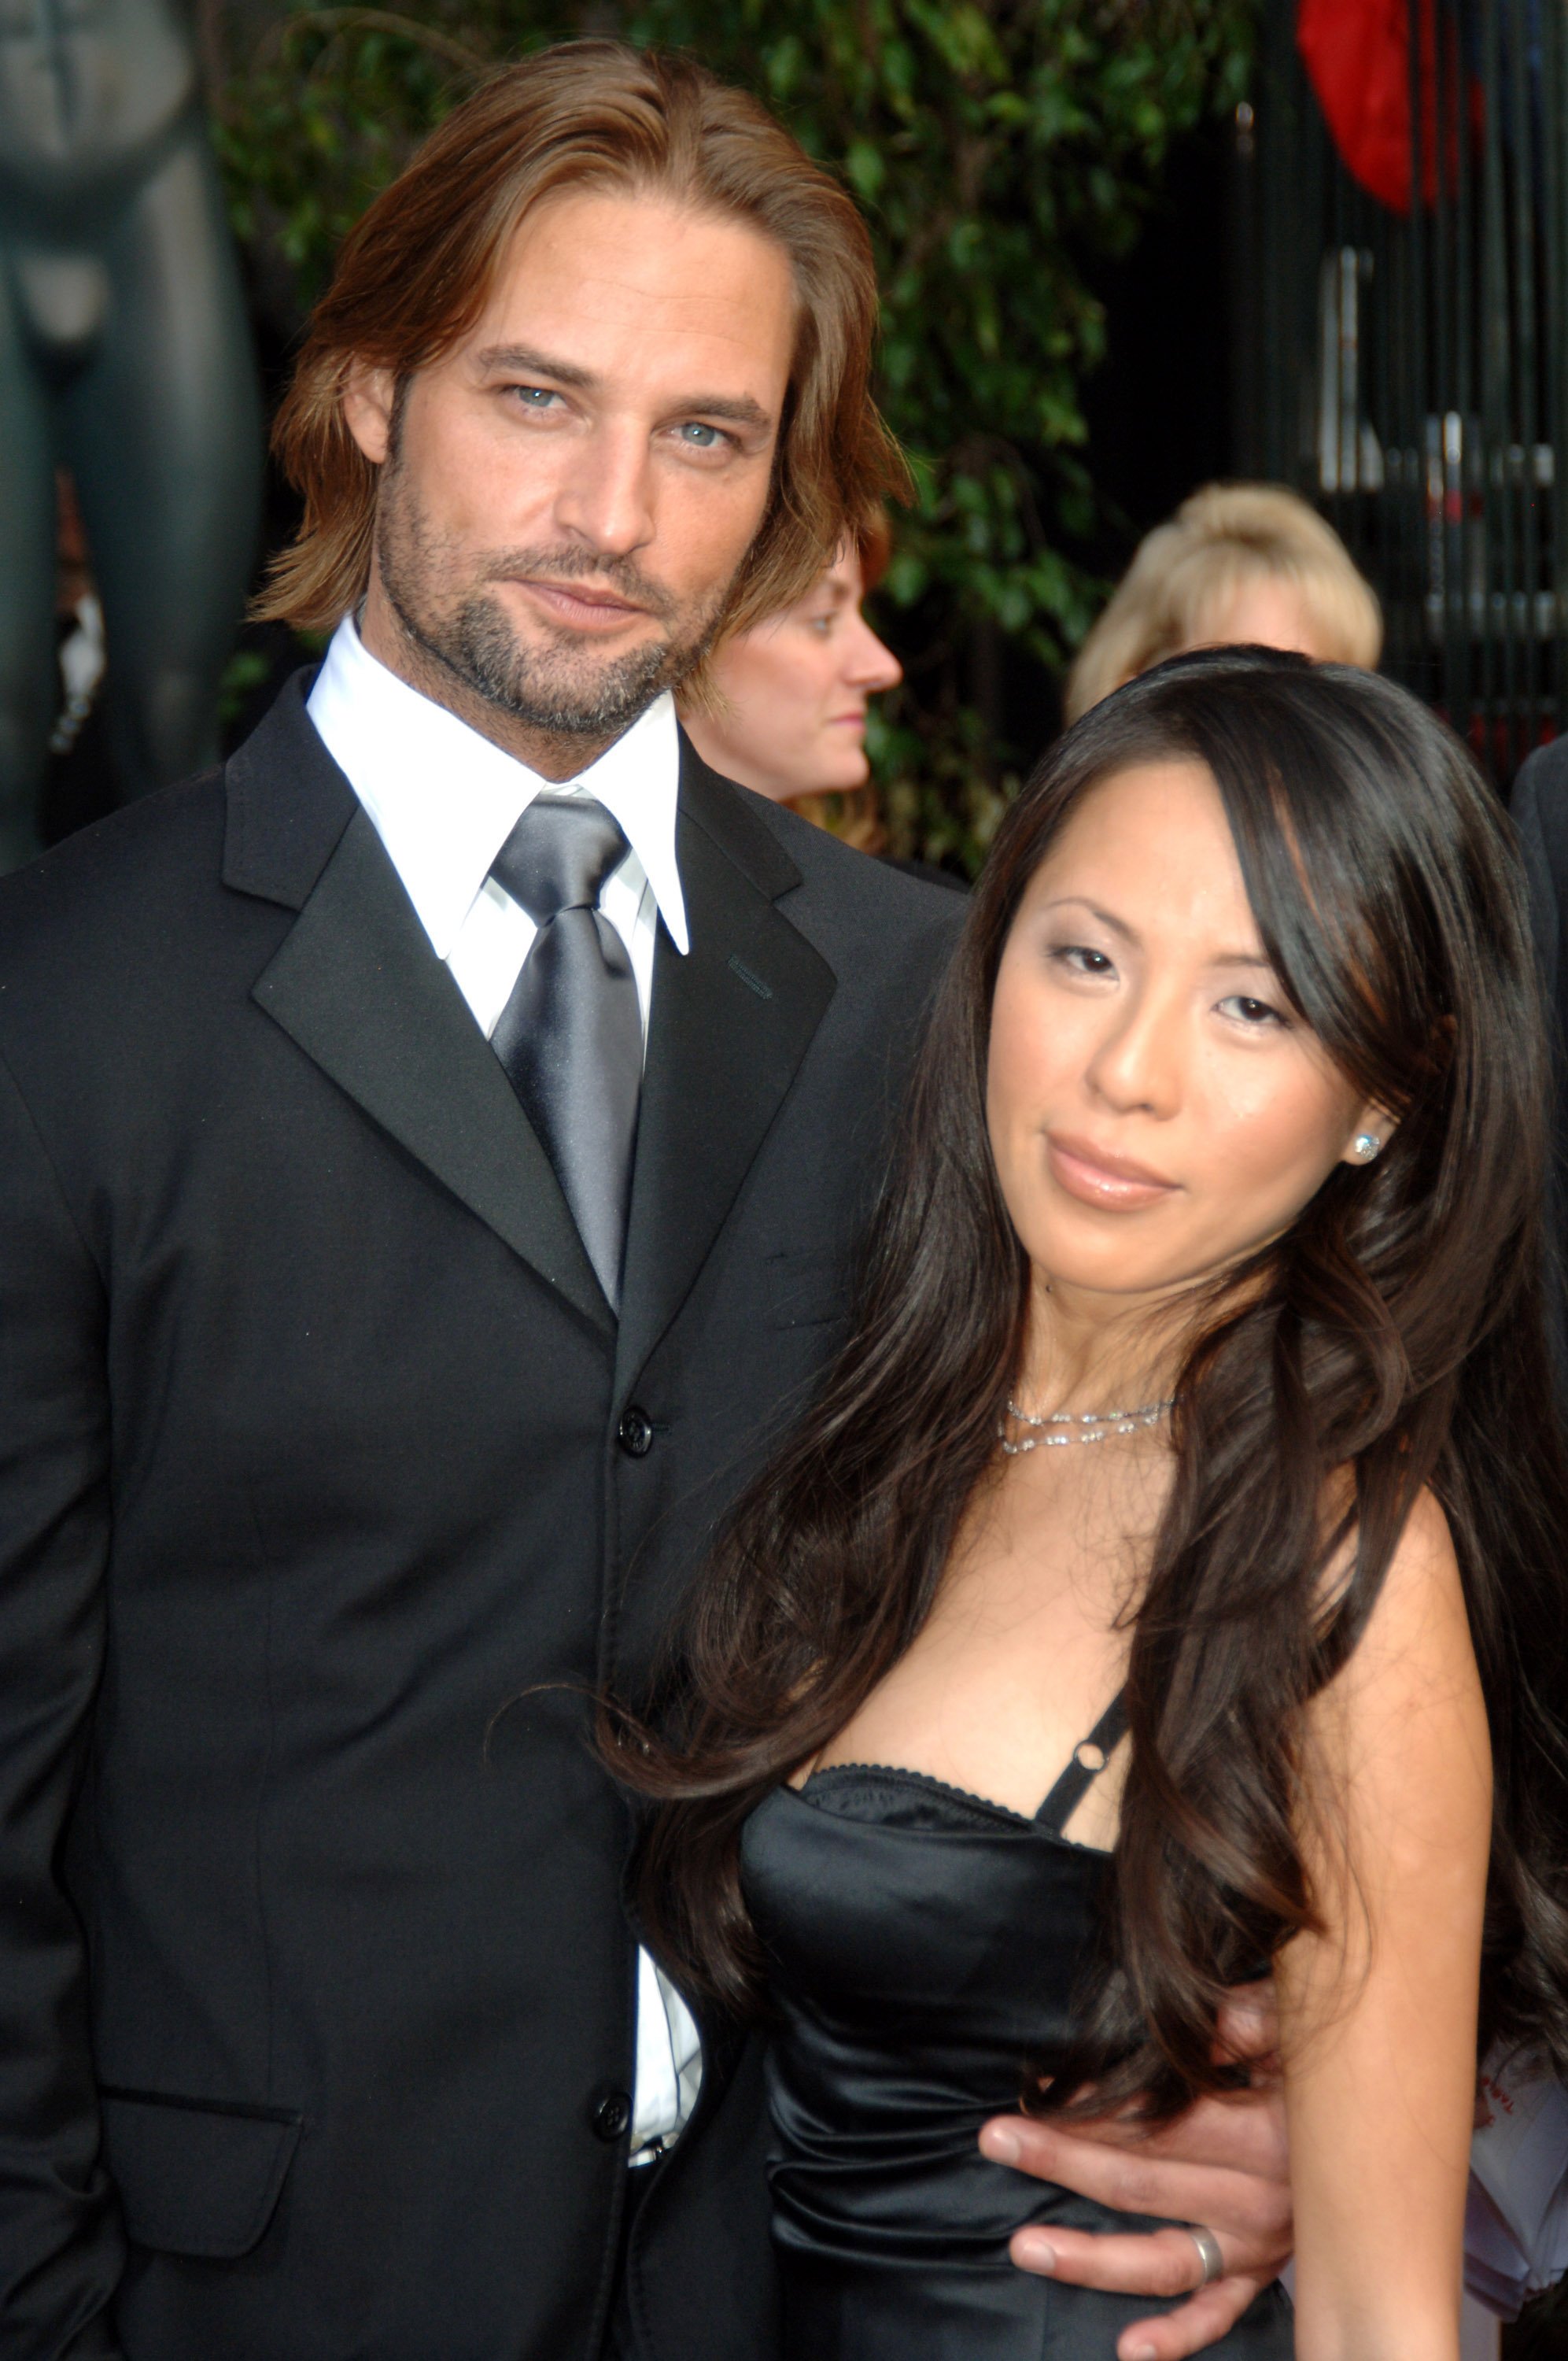 Josh Holloway and Yessica Kumala at the 12th Annual Screen Actors Guild Awards on January 29, 2006. | Source: Getty Images